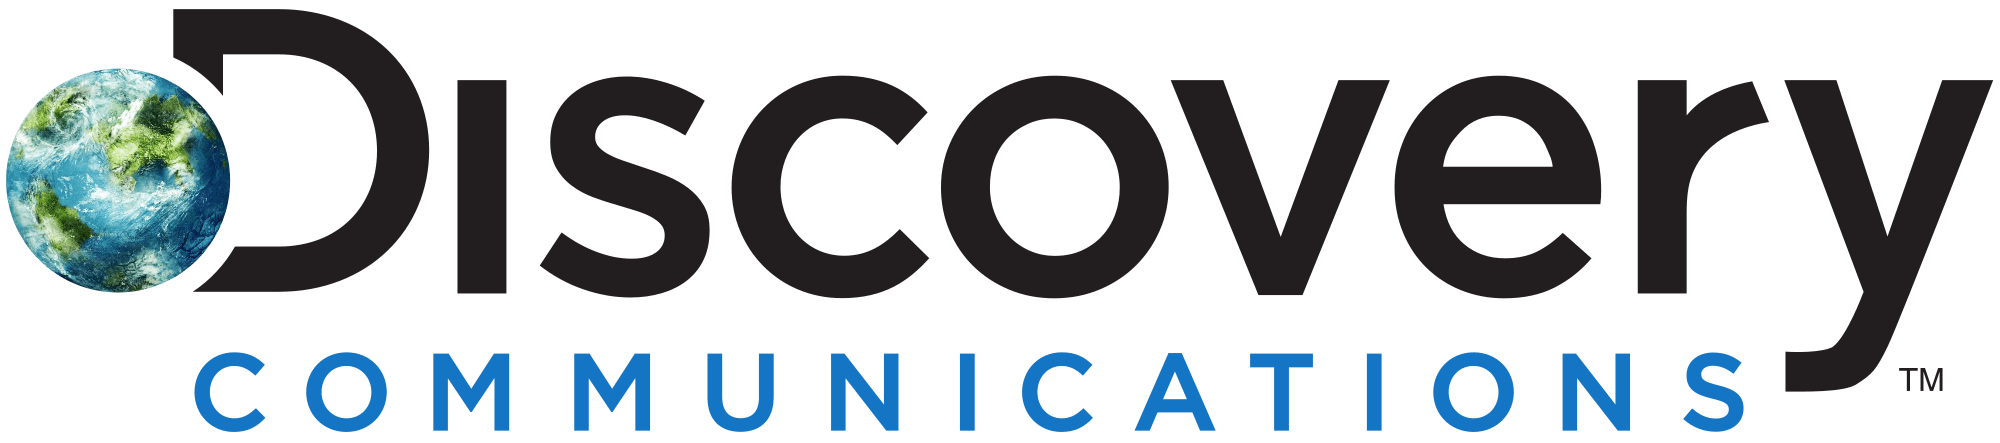 Discovery Communications Logo - Discovery Communications Competitors, Revenue and Employees - Owler ...